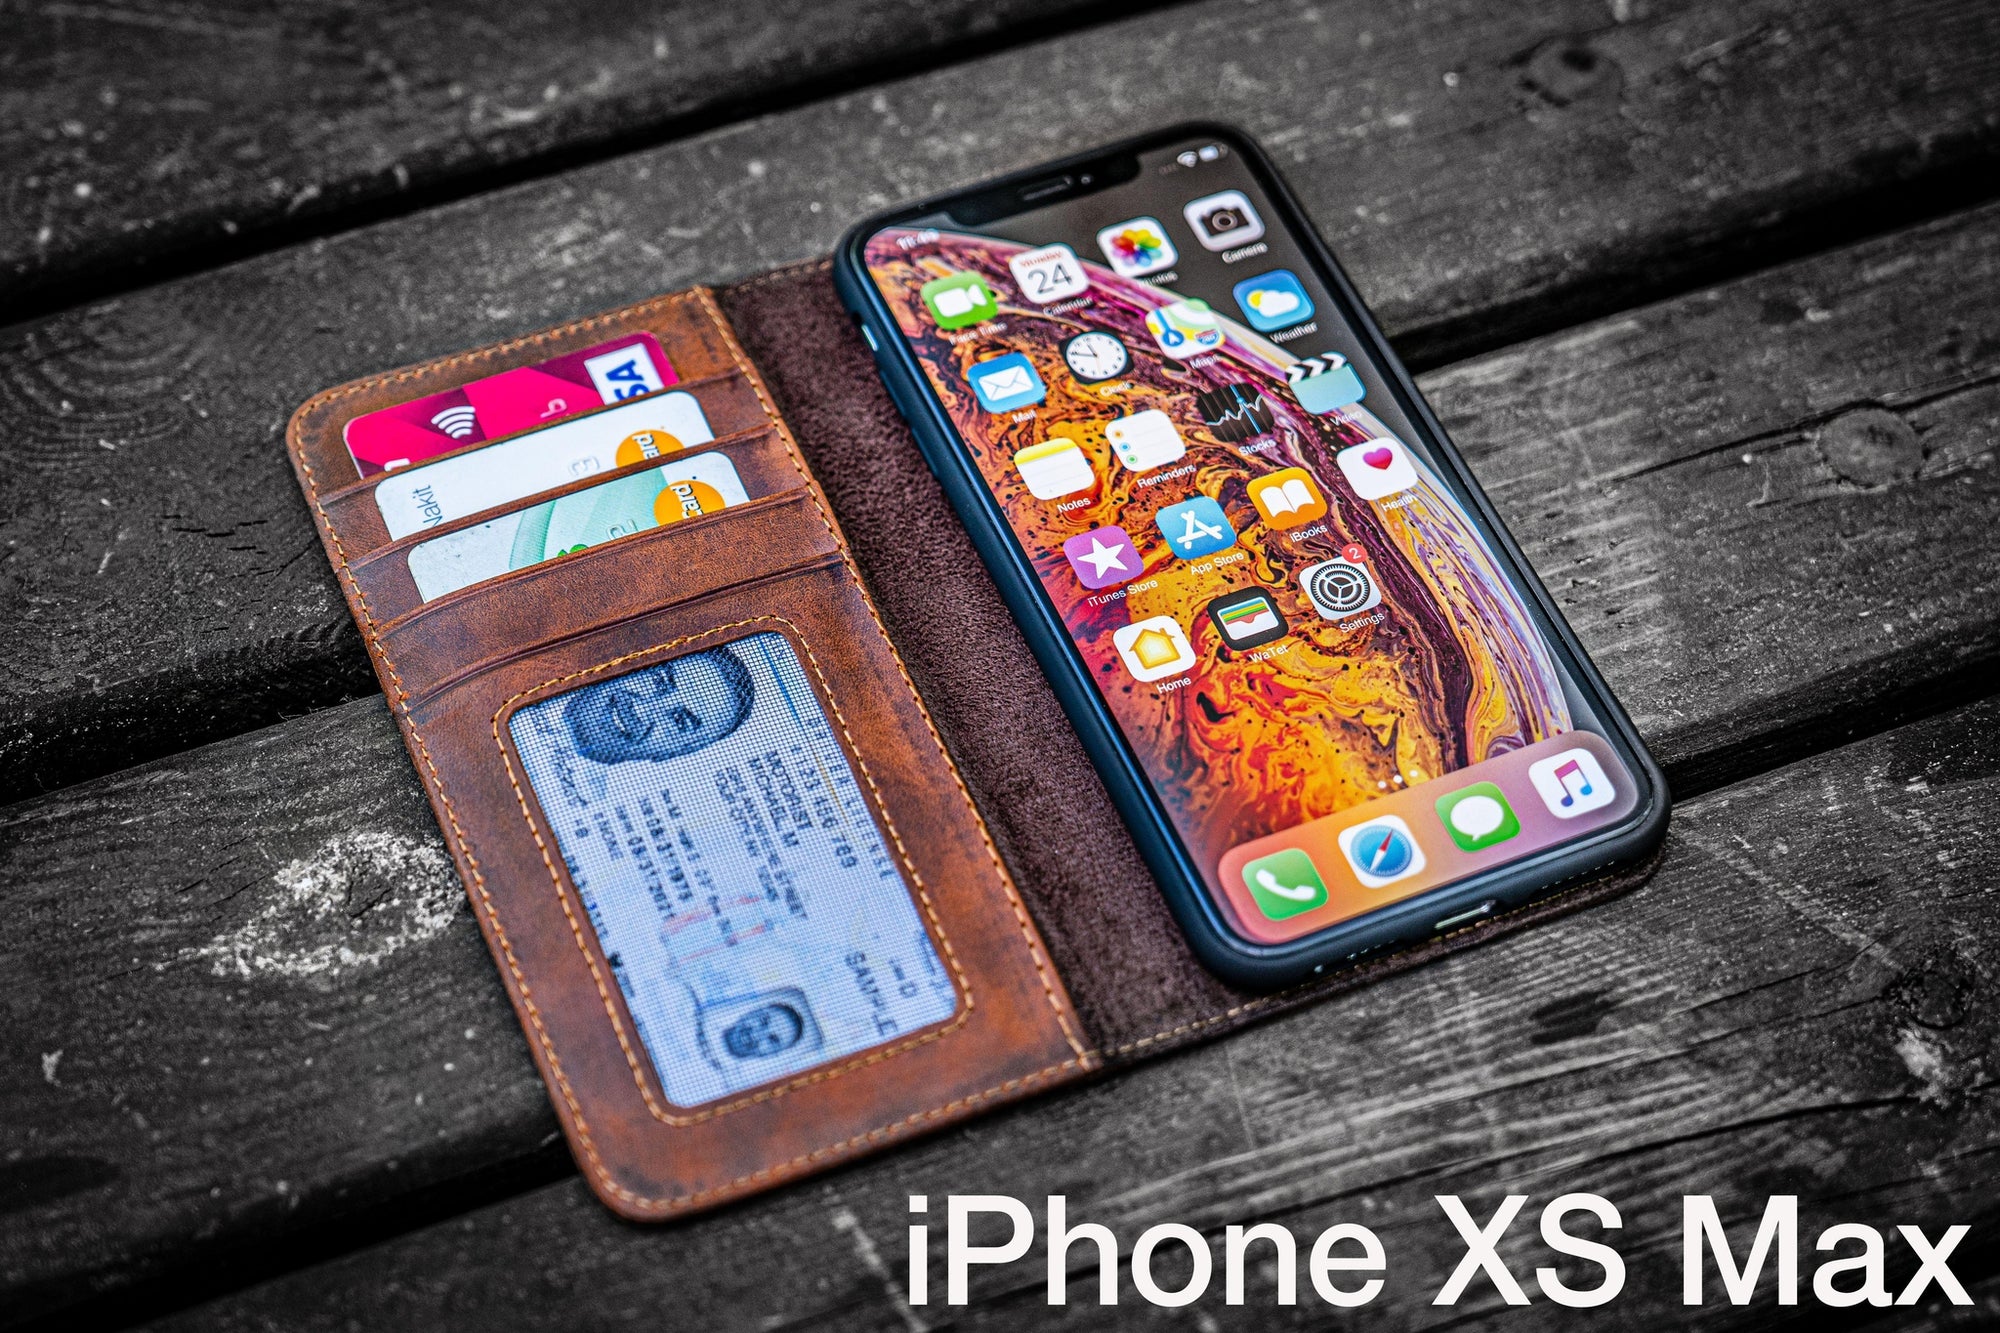 Galen Leather iPhone 13 (6.1) Leather Wallet Case